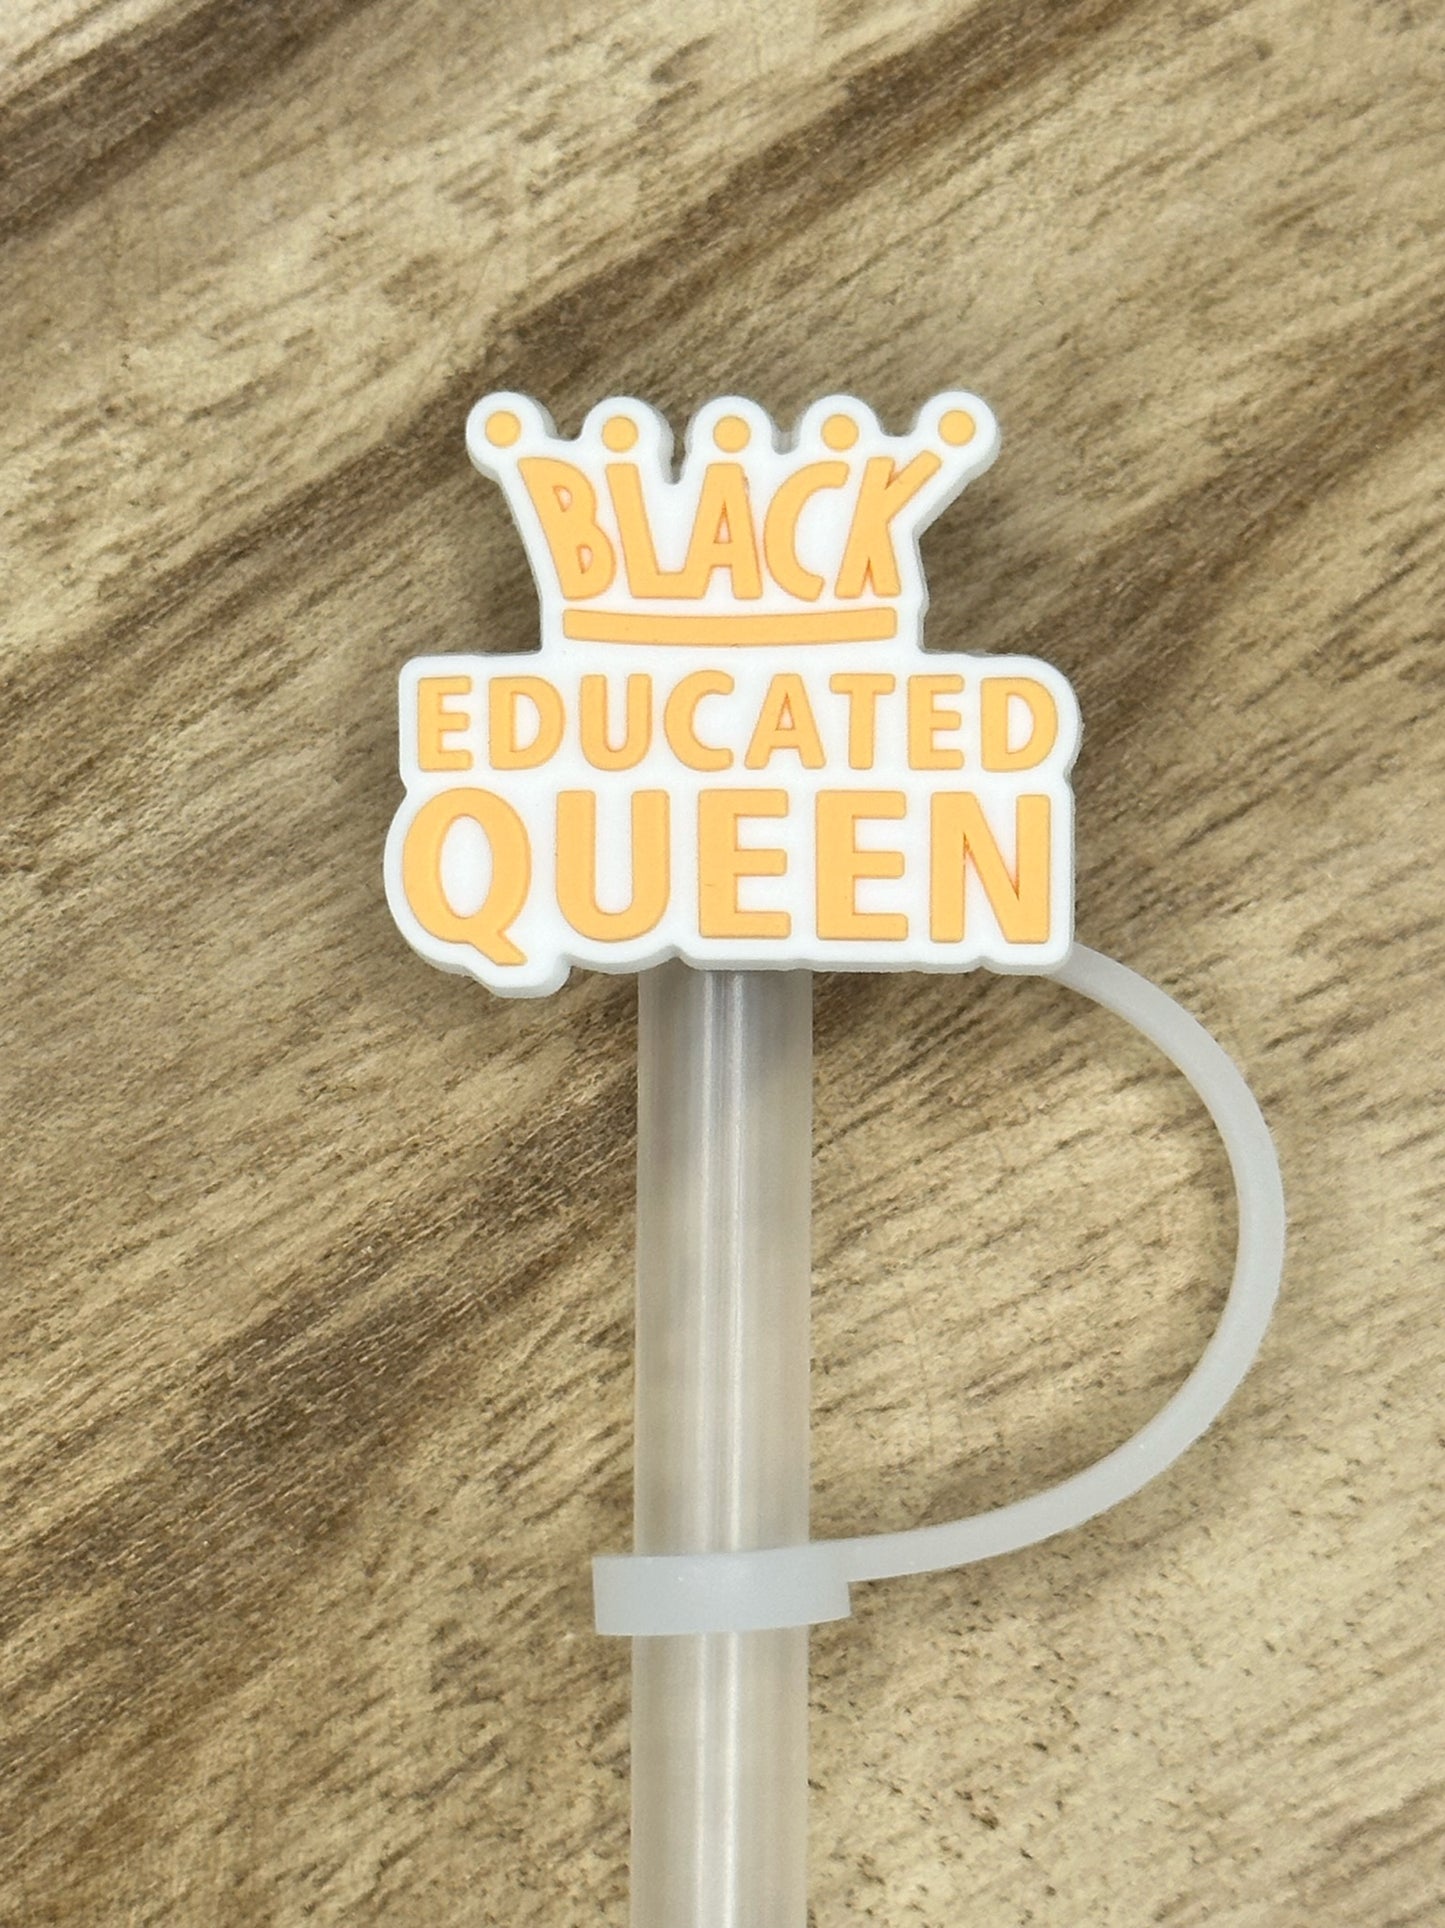 Black Educated Queen Straw Topper | Tumbler Accessory | Gifts for Her